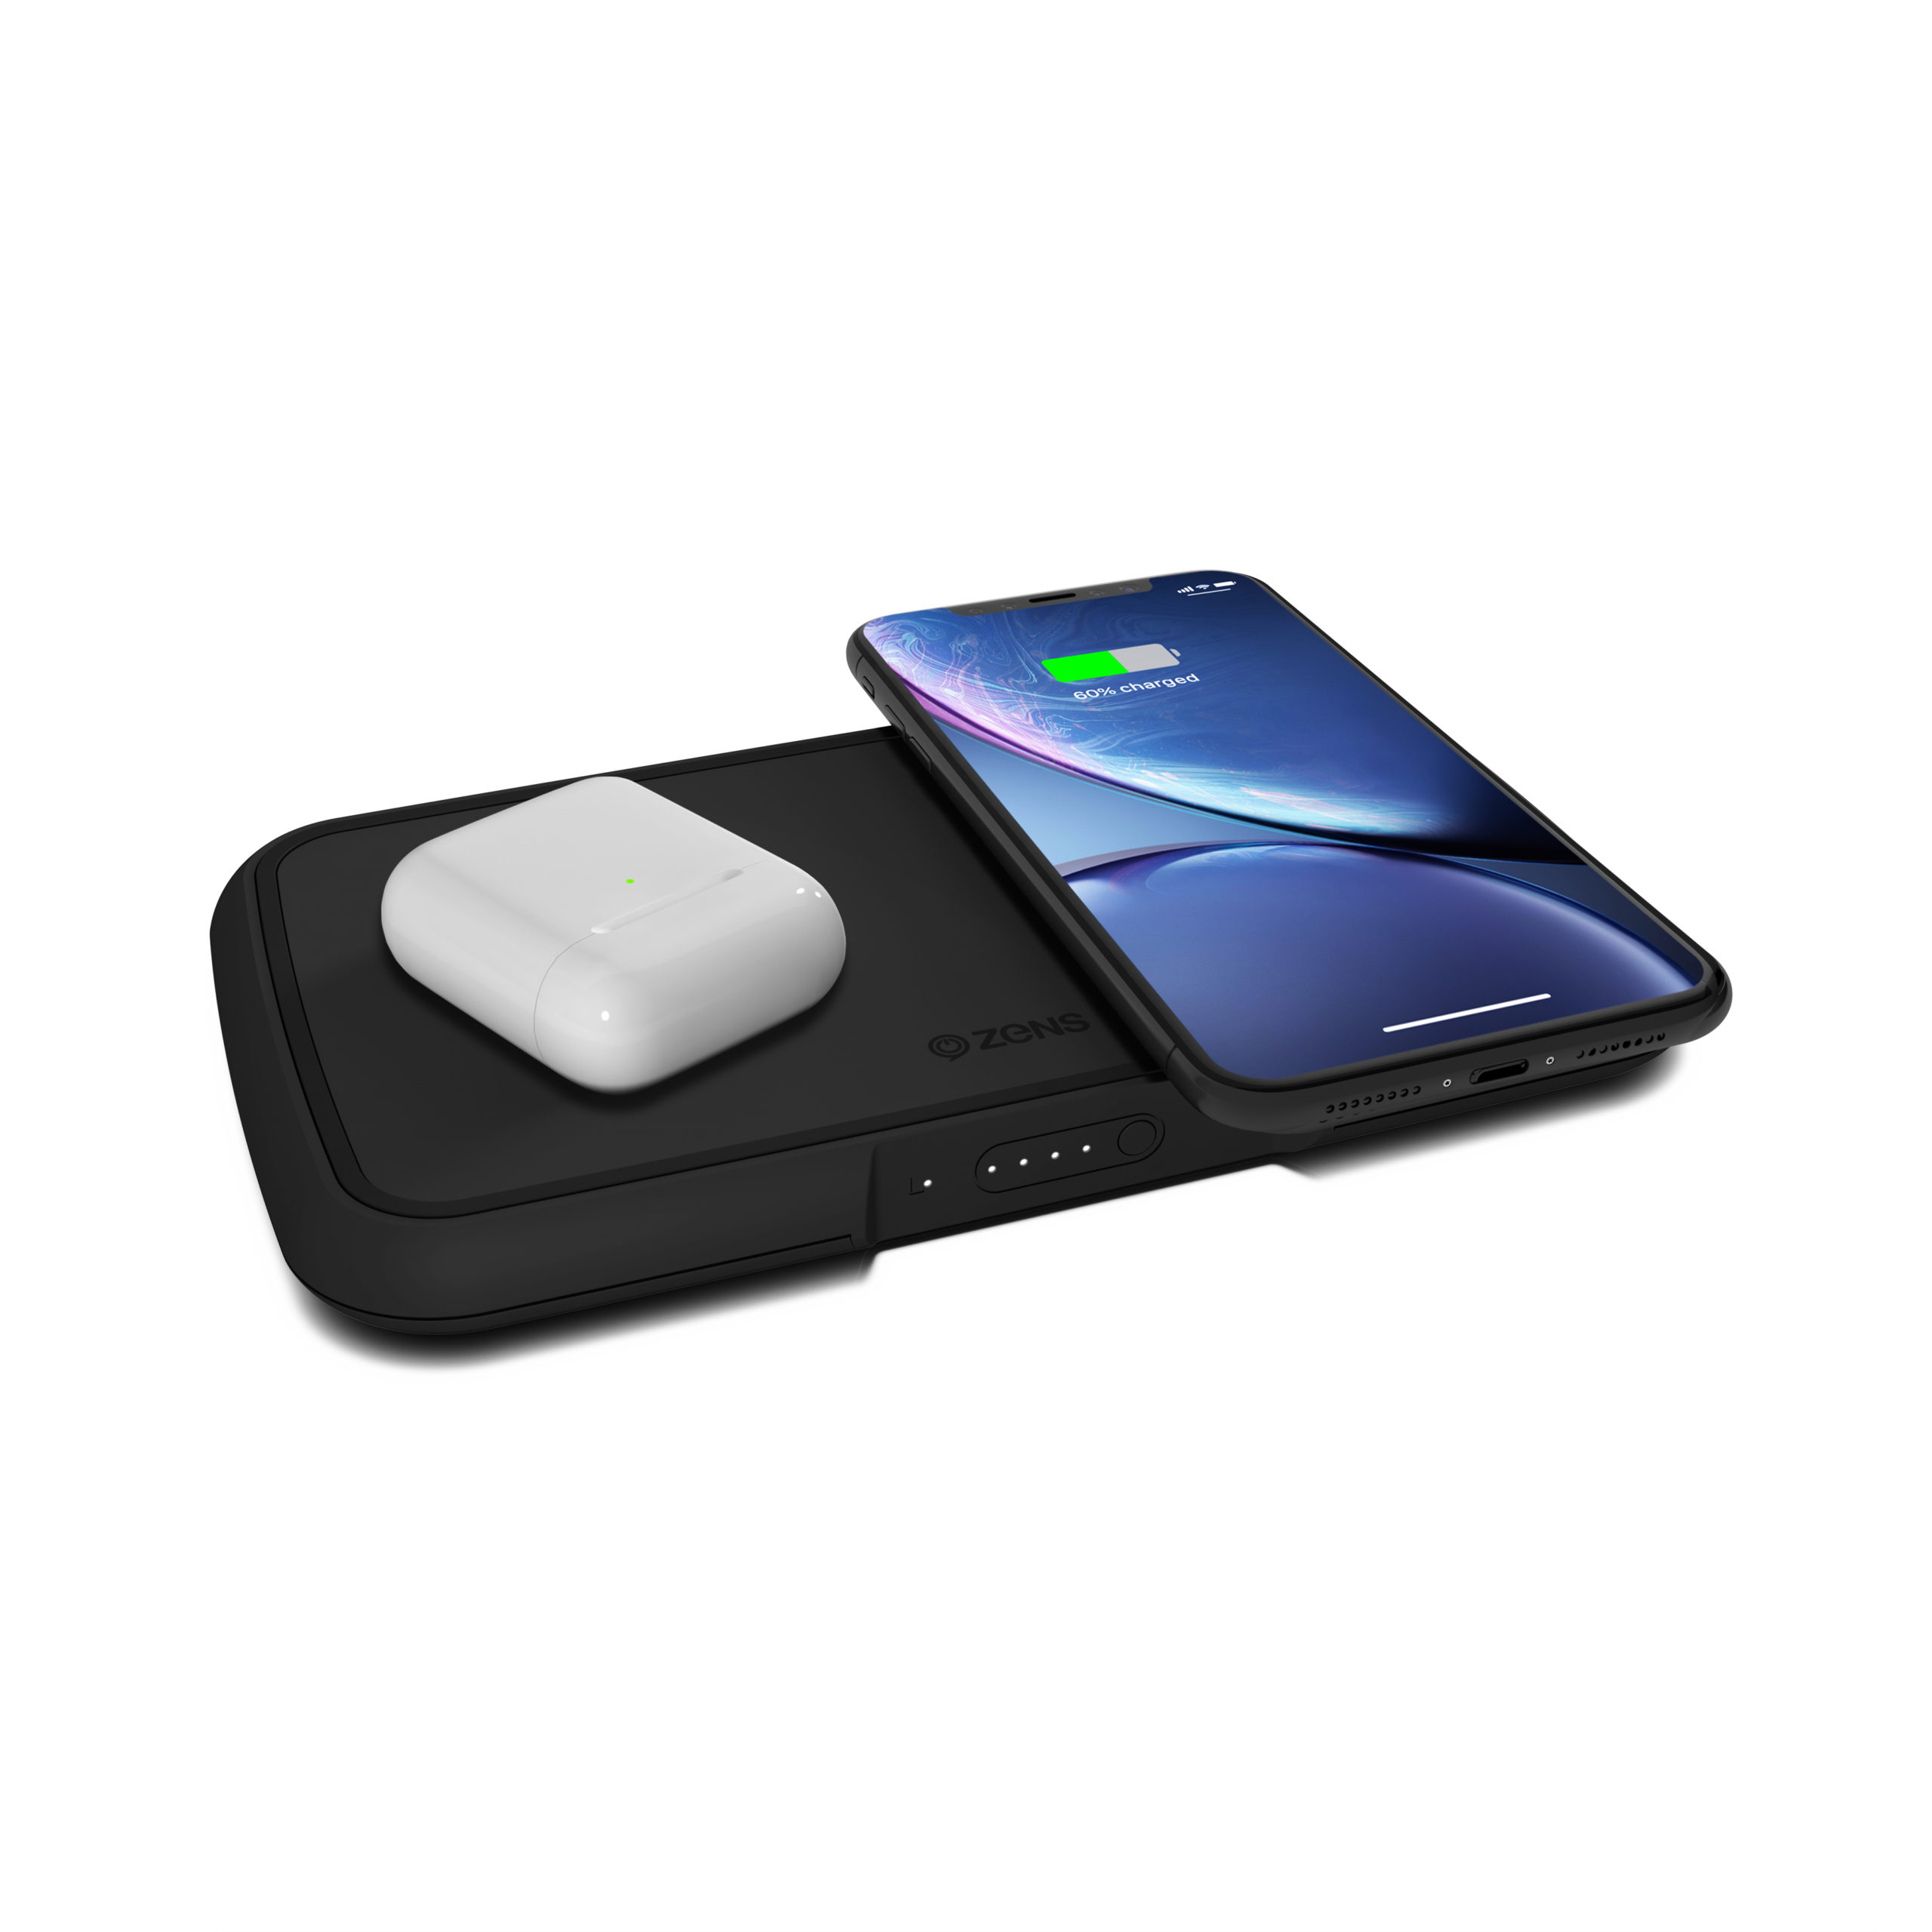 ZENS Dual Wireless Powerbank with Apple AirPods and iPhone Xr scaled